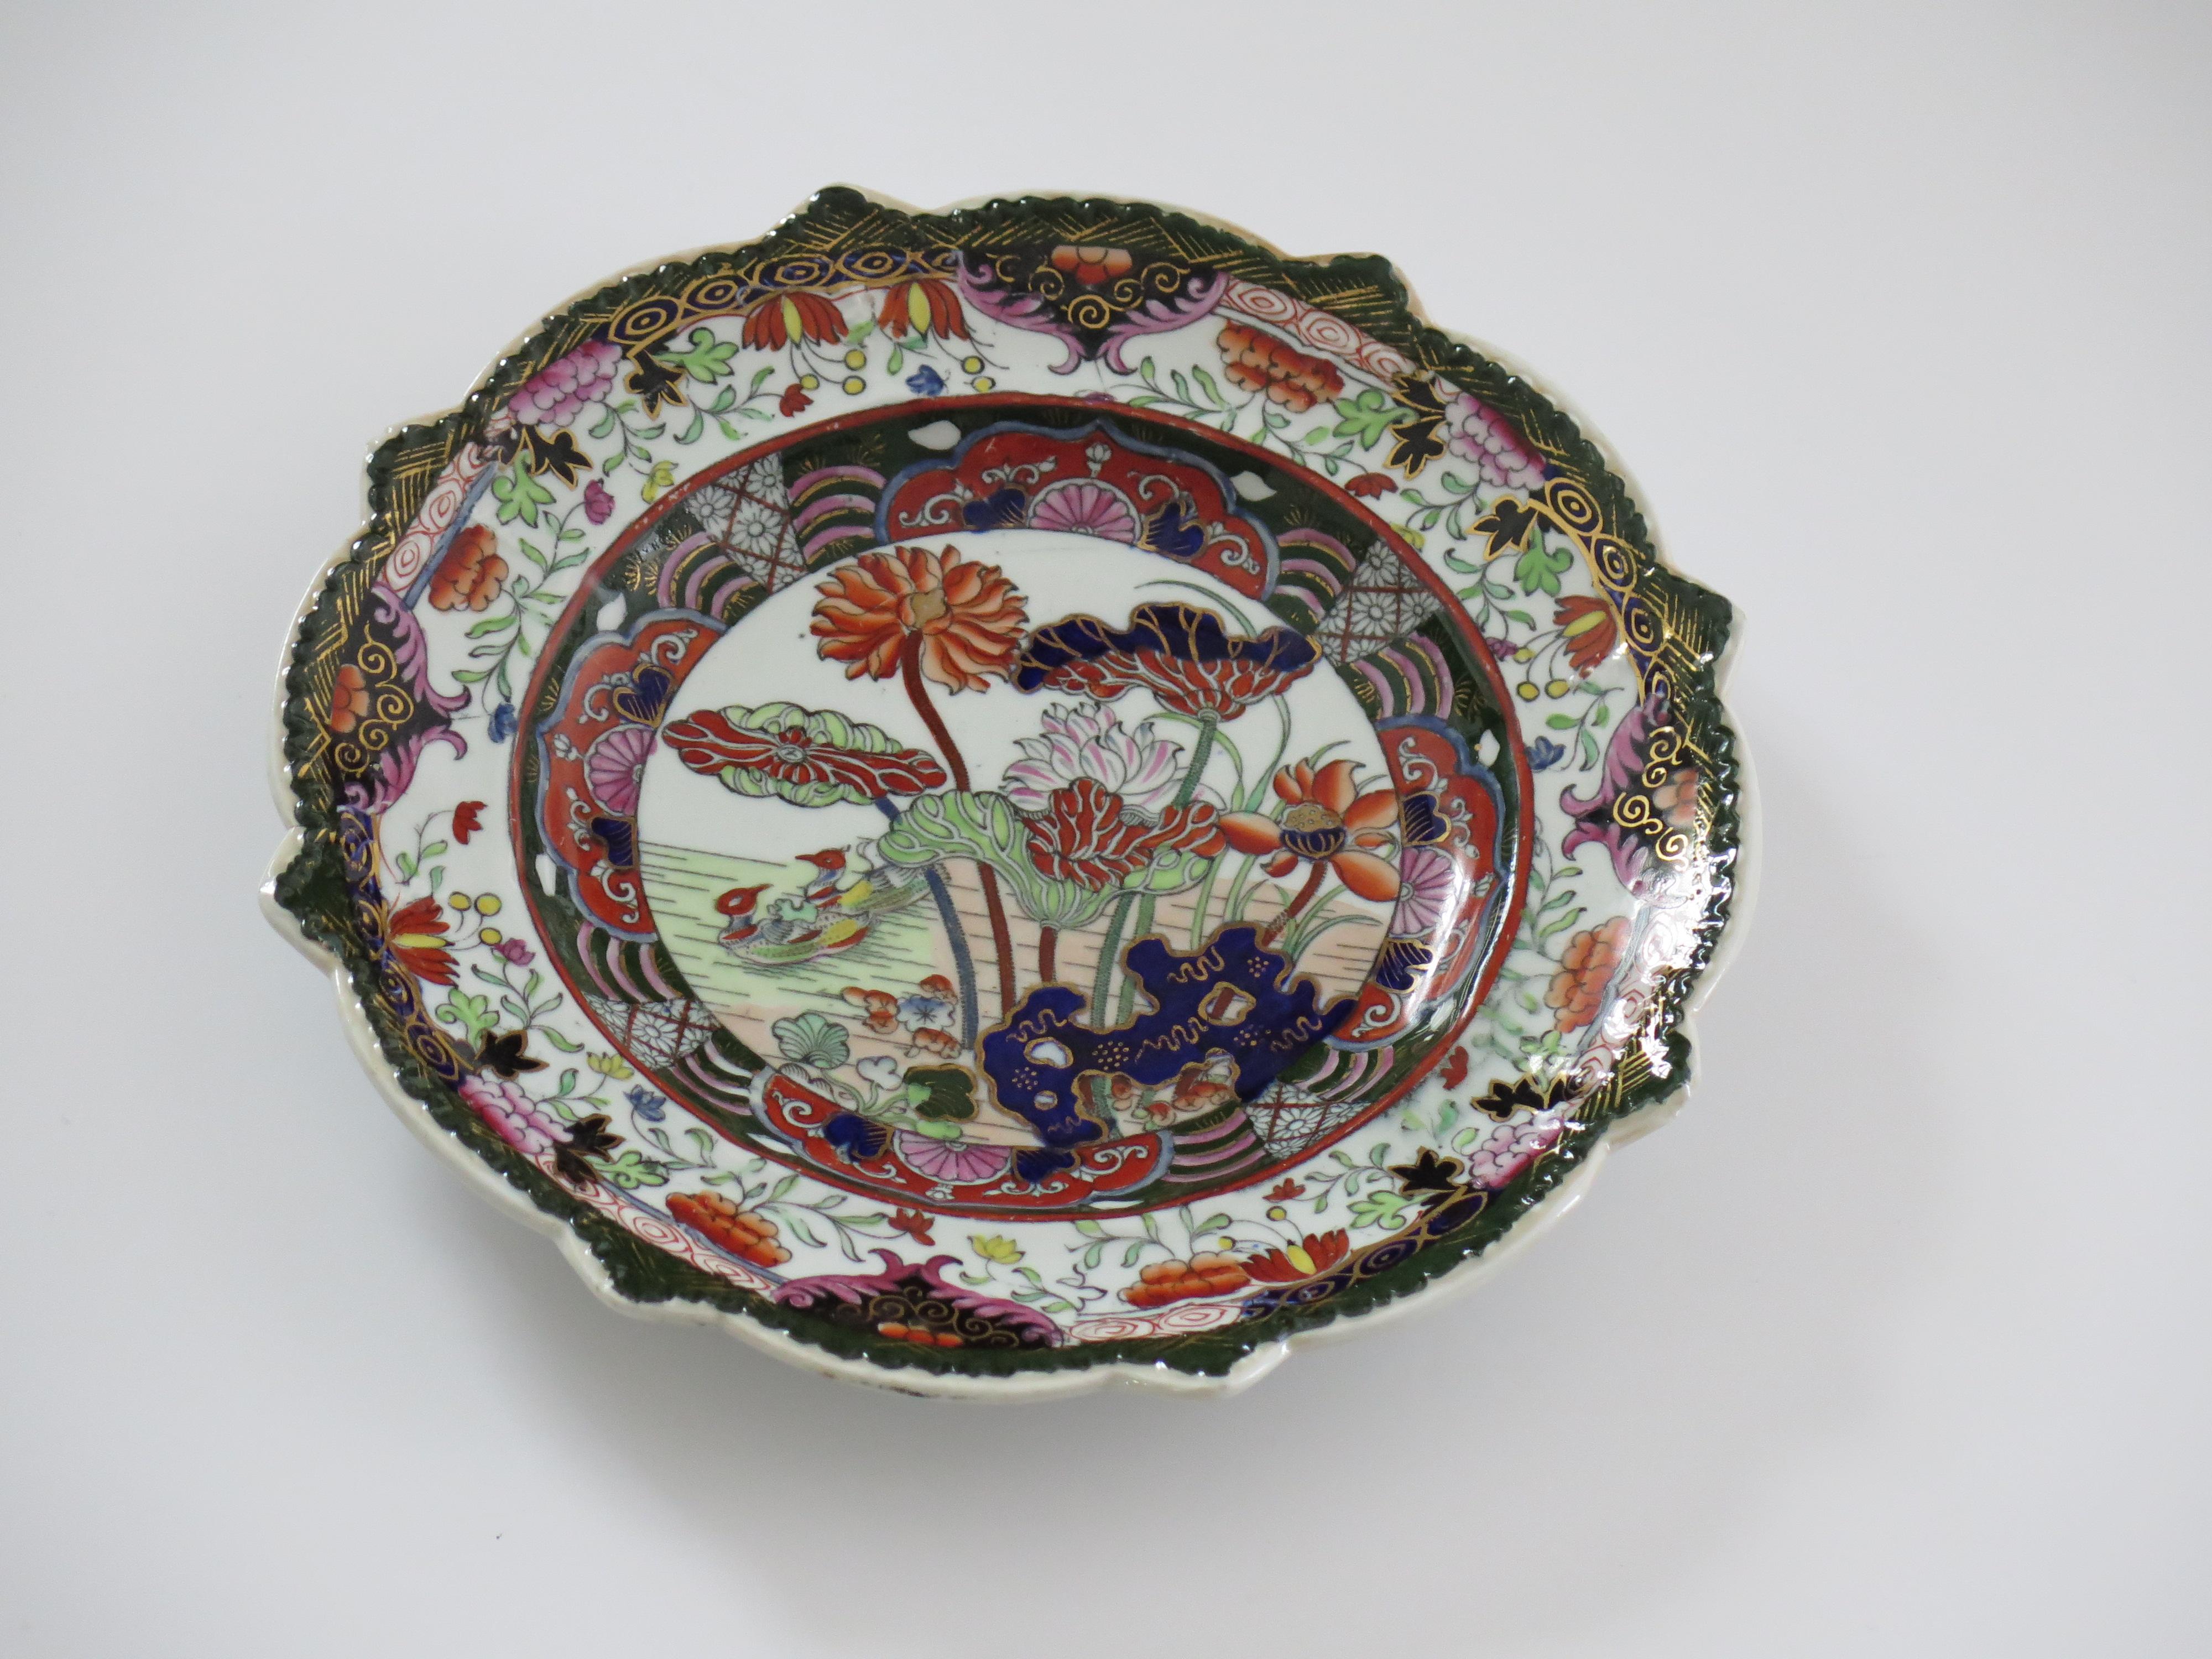 This is a beautifully hand painted shaped Plate in the rare Muscove Duck pattern by Mason's Ironstone, Lane Delph, England, dating to circa 1825.

The piece is well potted with a star shaped moulded rim .

The pattern is hand-painted and gilded